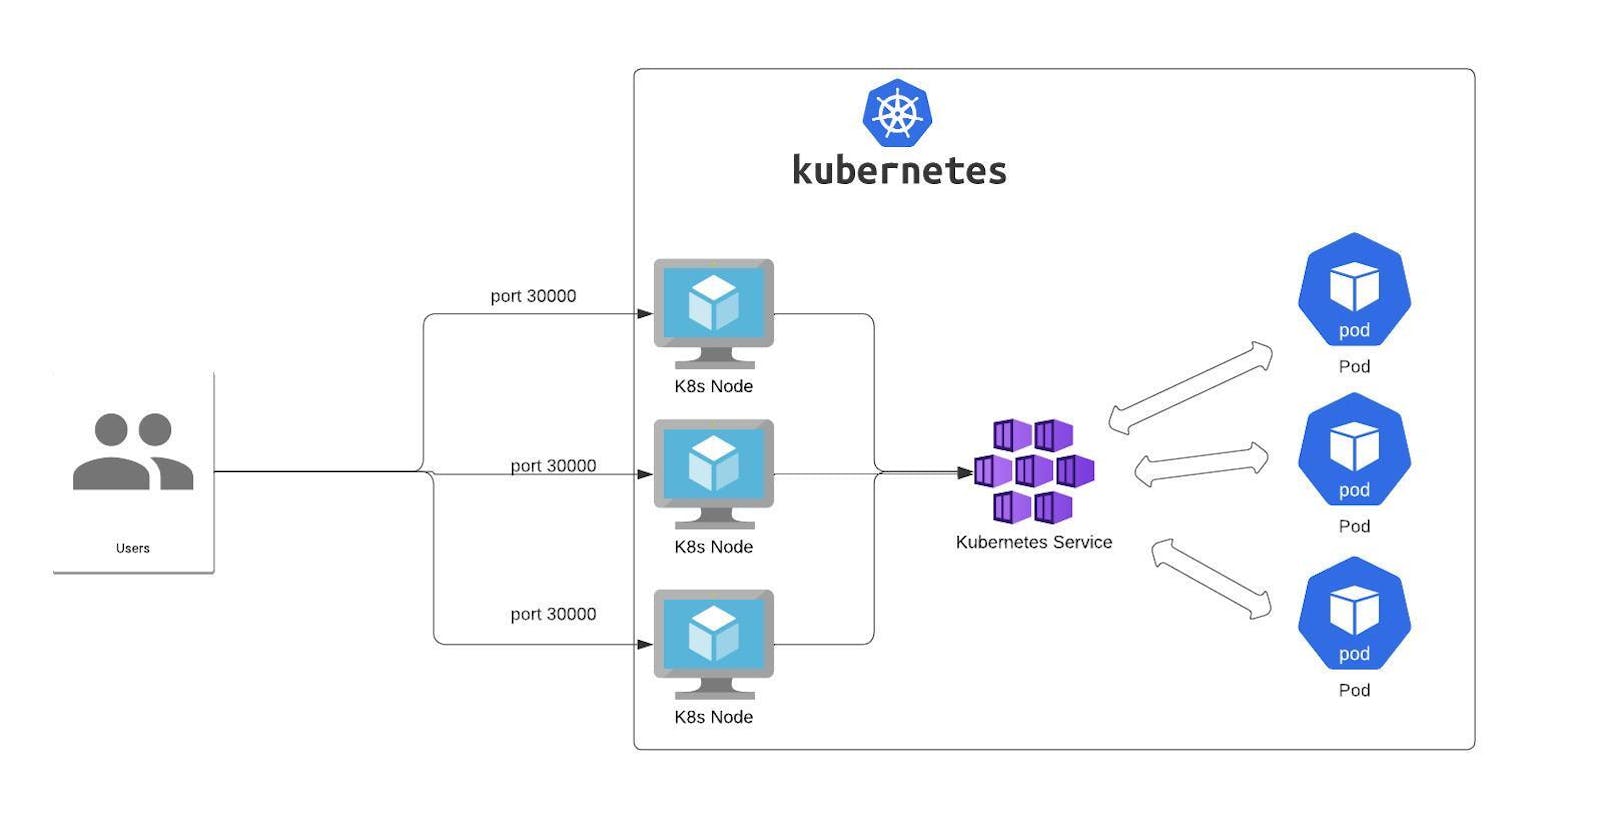 Kubernetes Networking
(Services, Ingress, Network Policies, DNS and CNI Plugins)